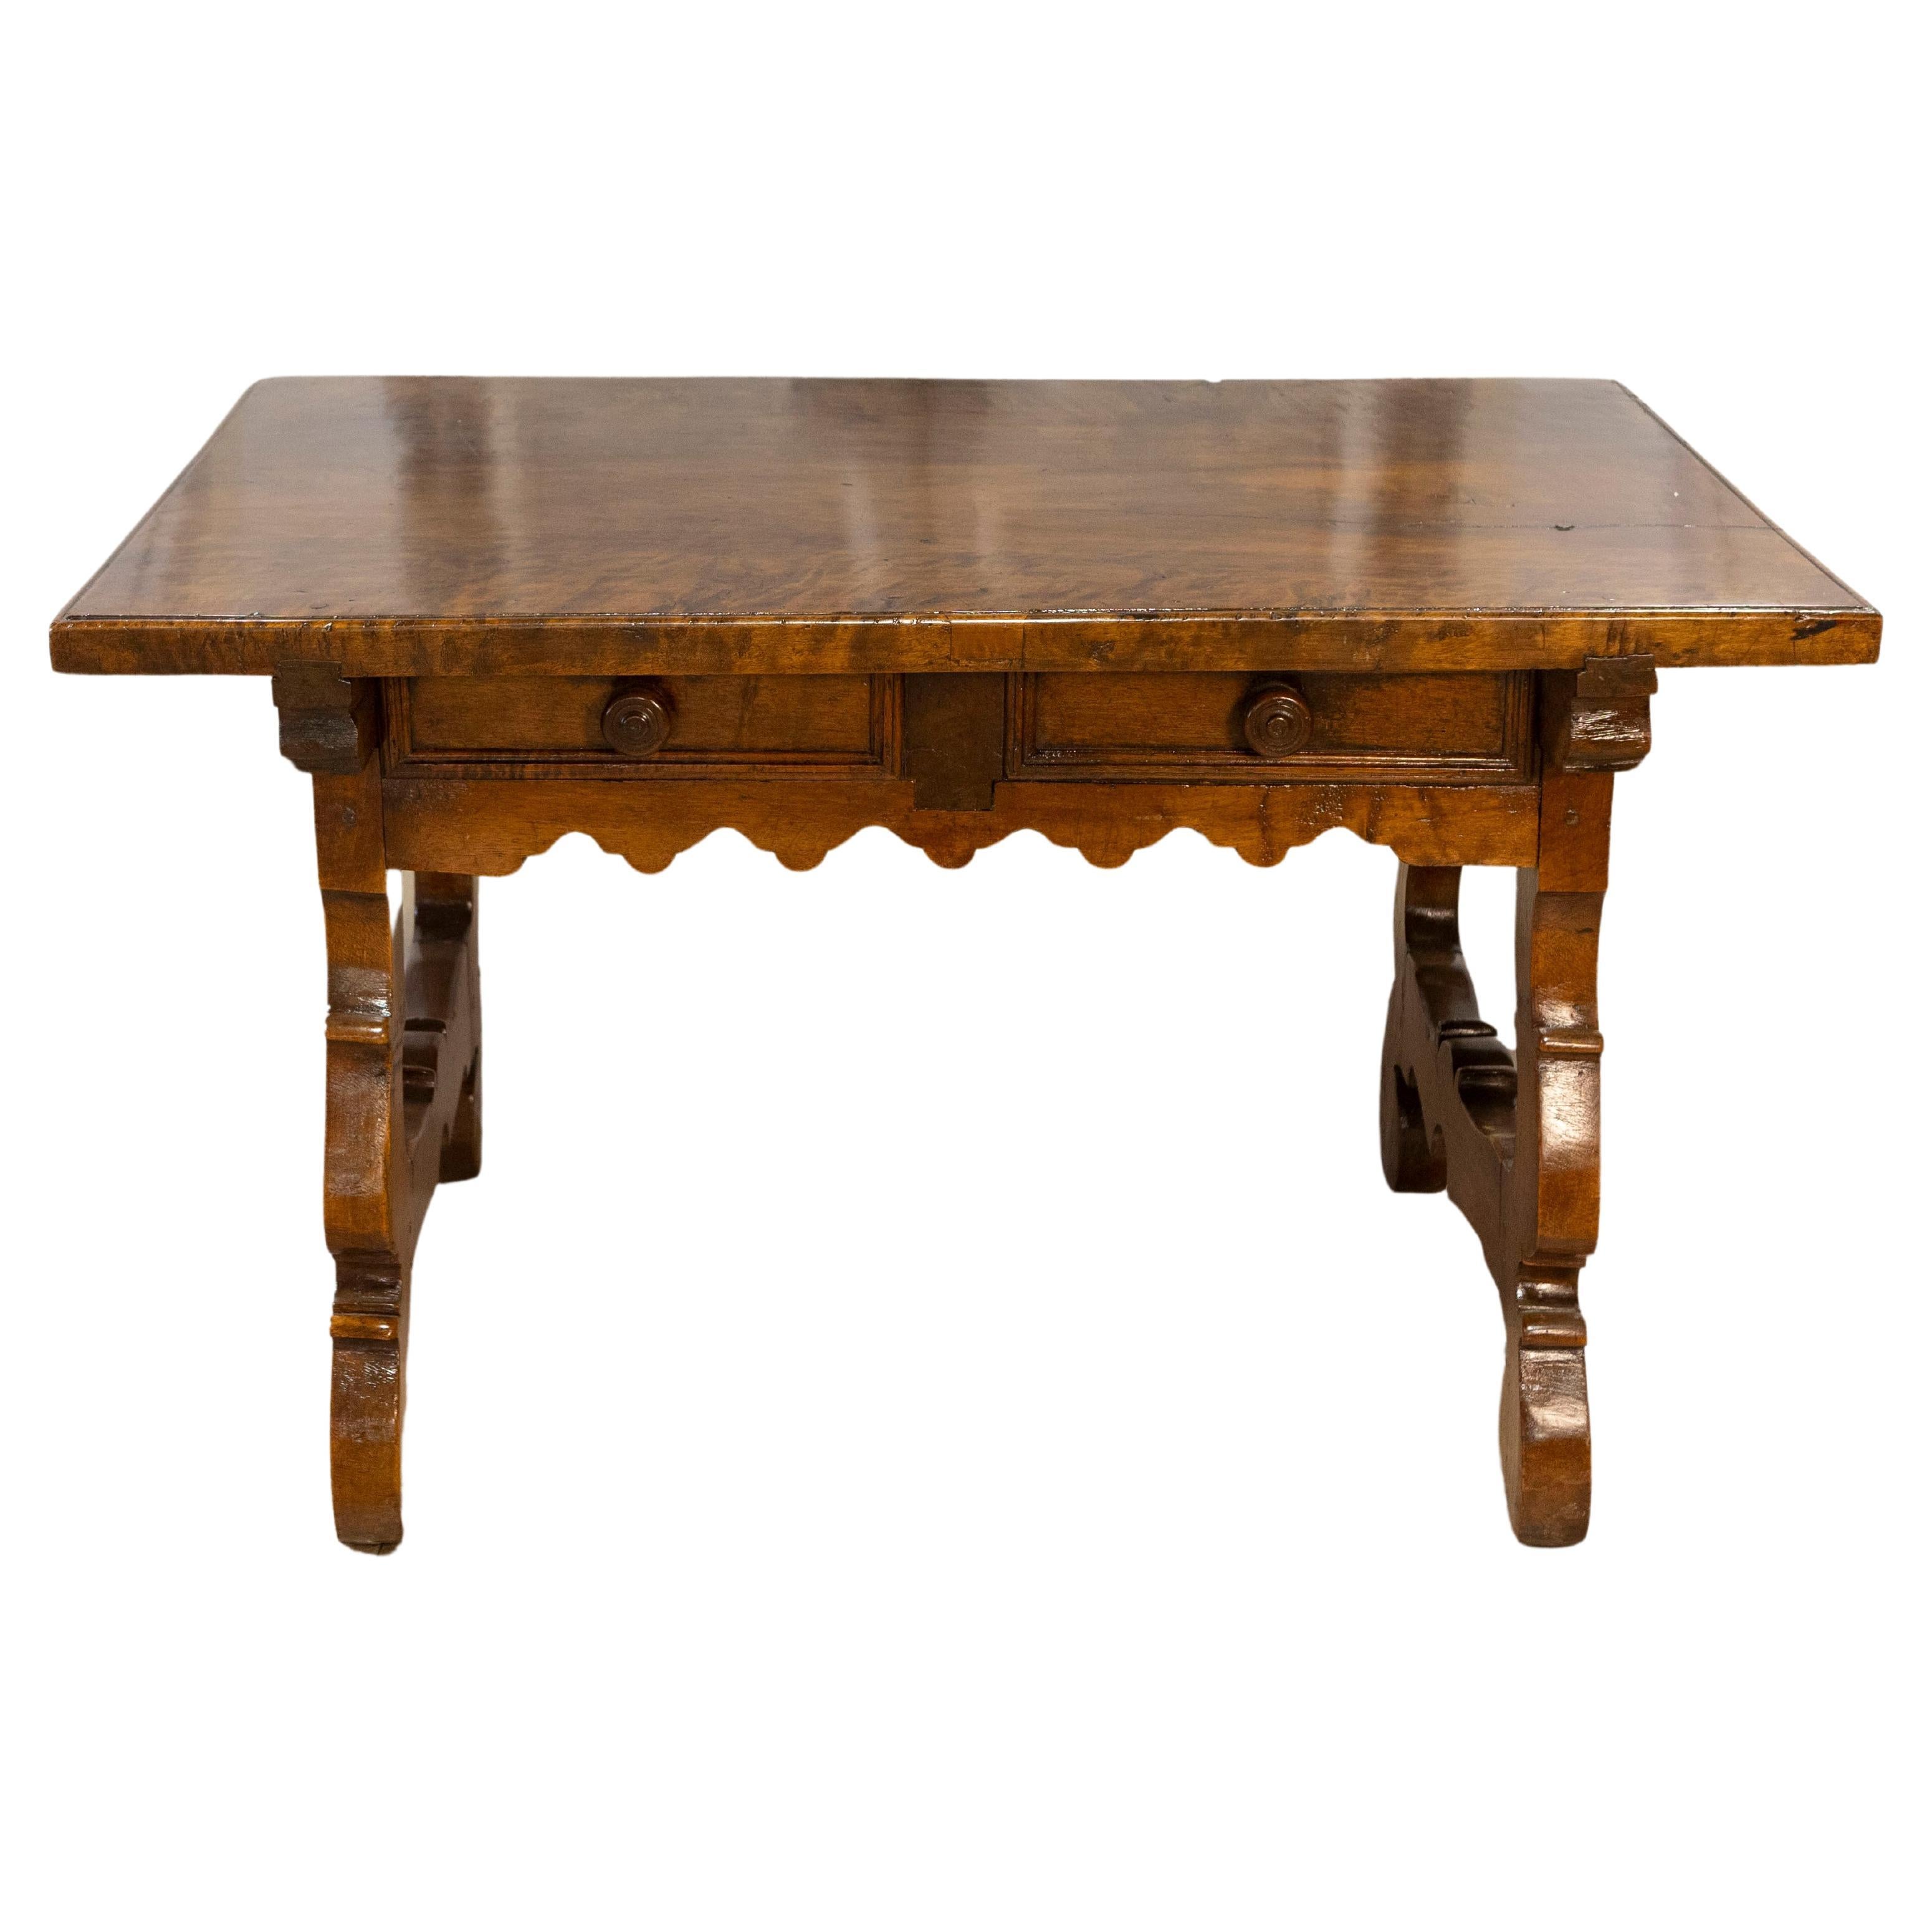 Italian Baroque Style Walnut 19th Century Fratino Table with Carved Lyre Base